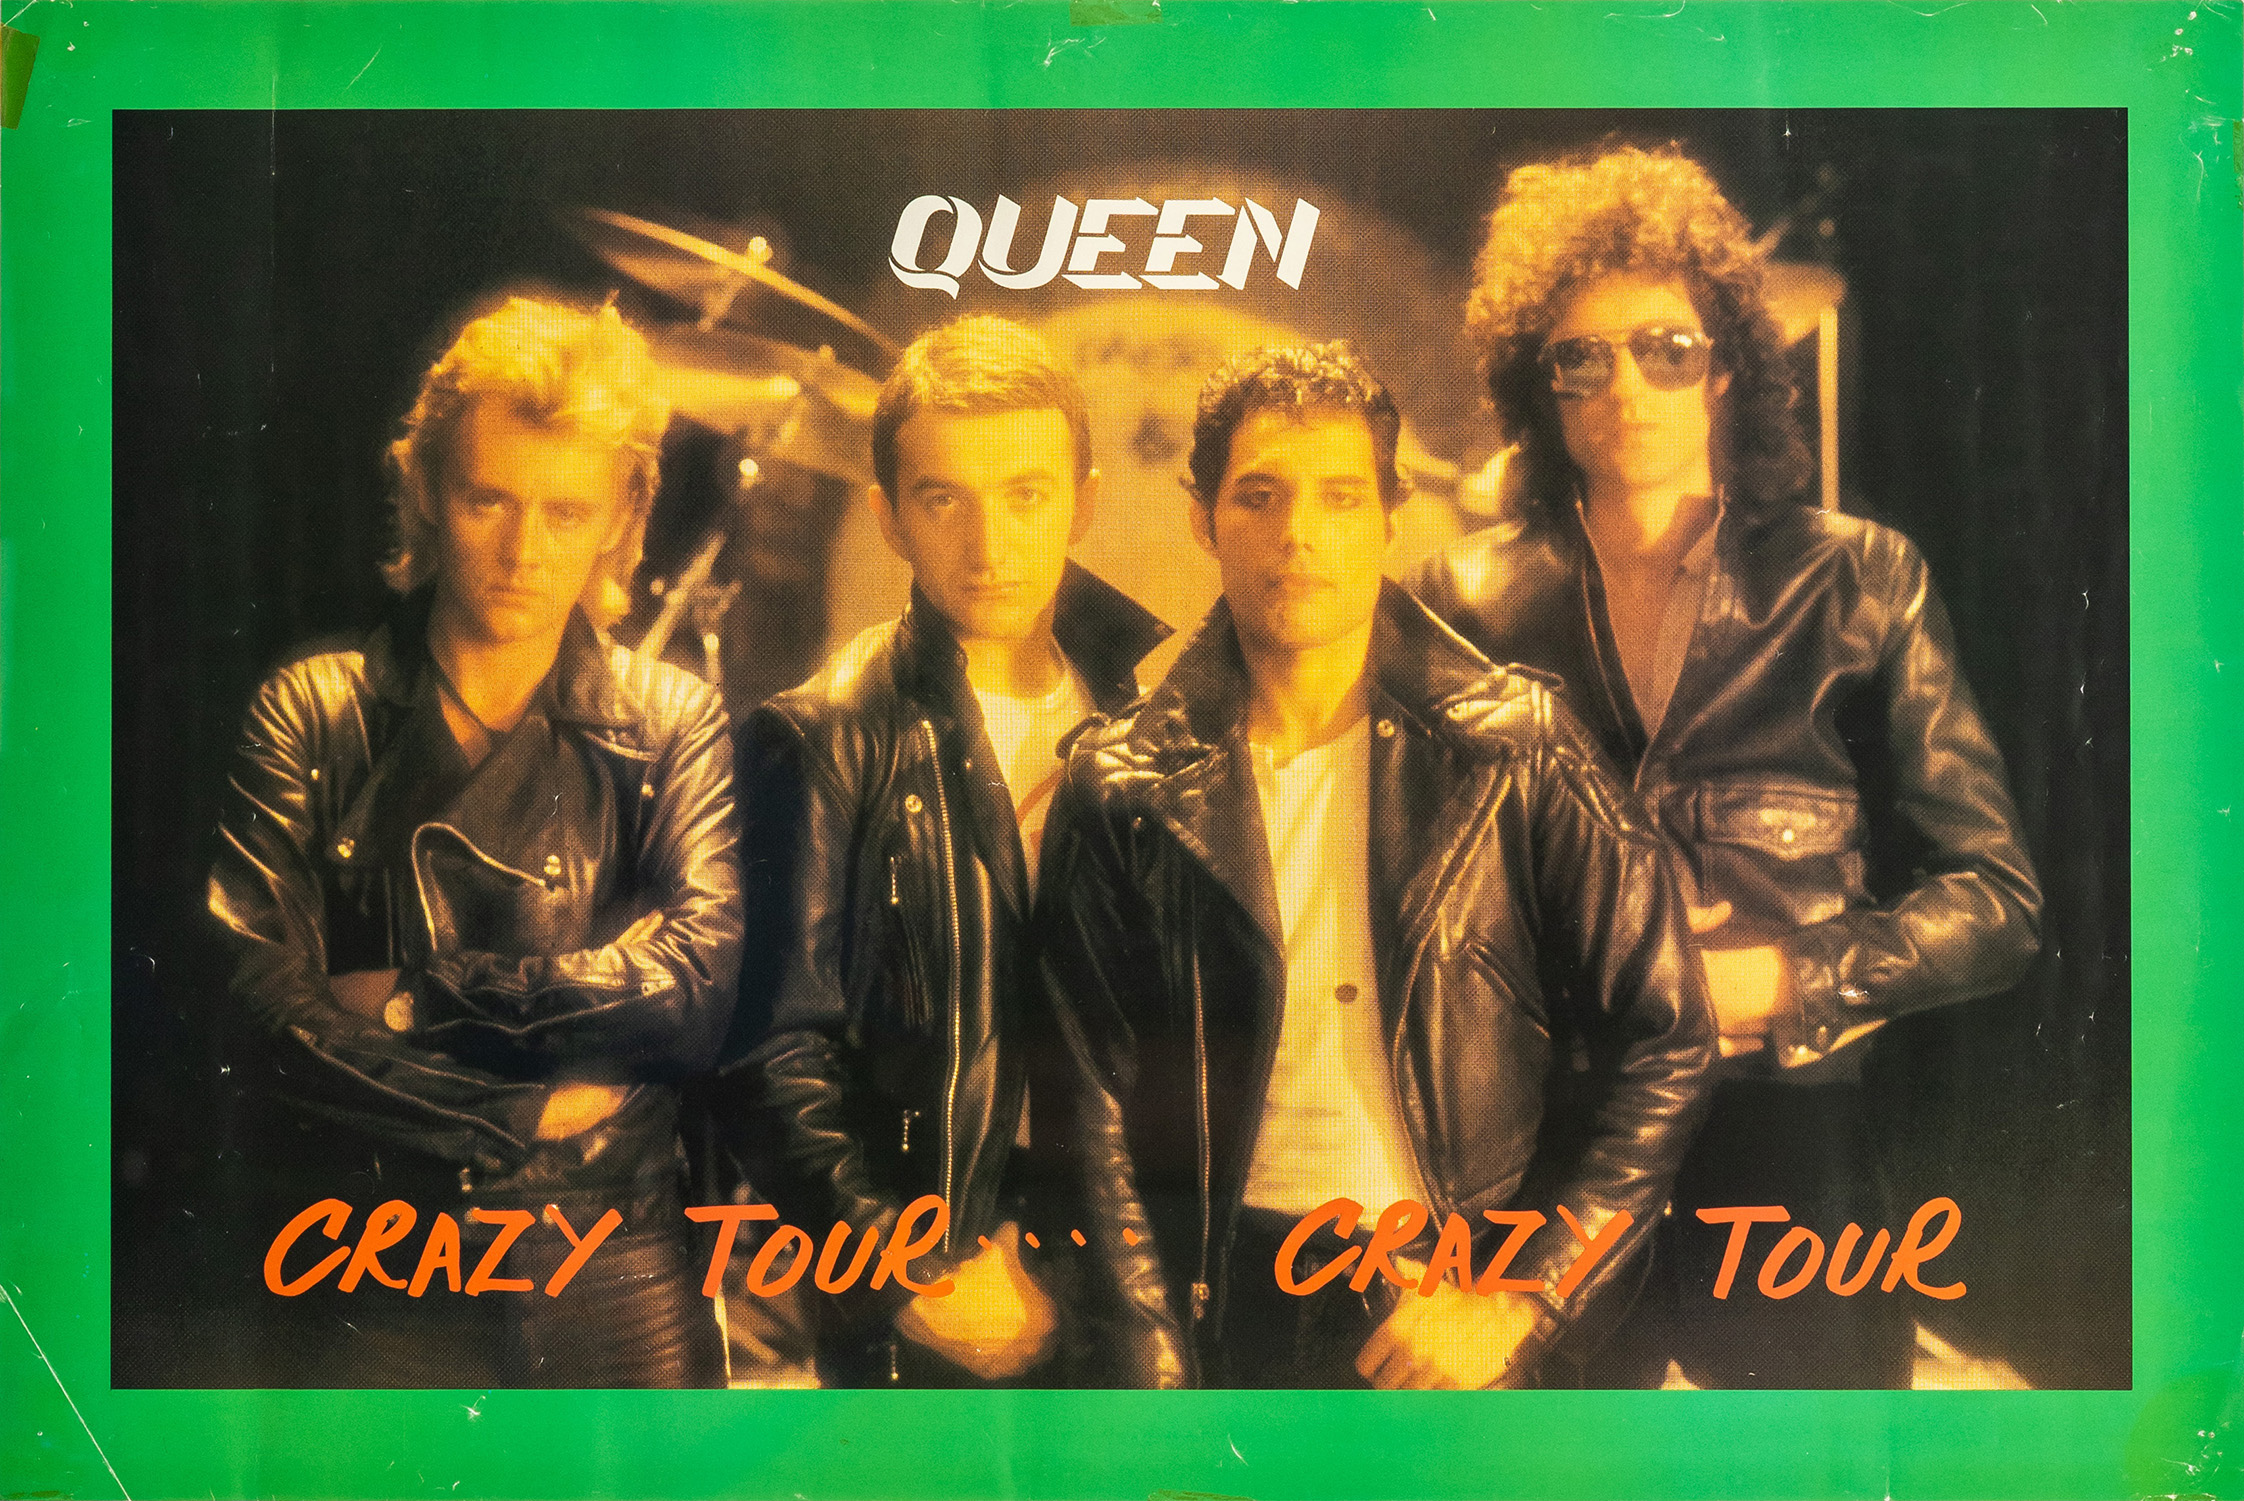 Queen on Crazy tour in 1979